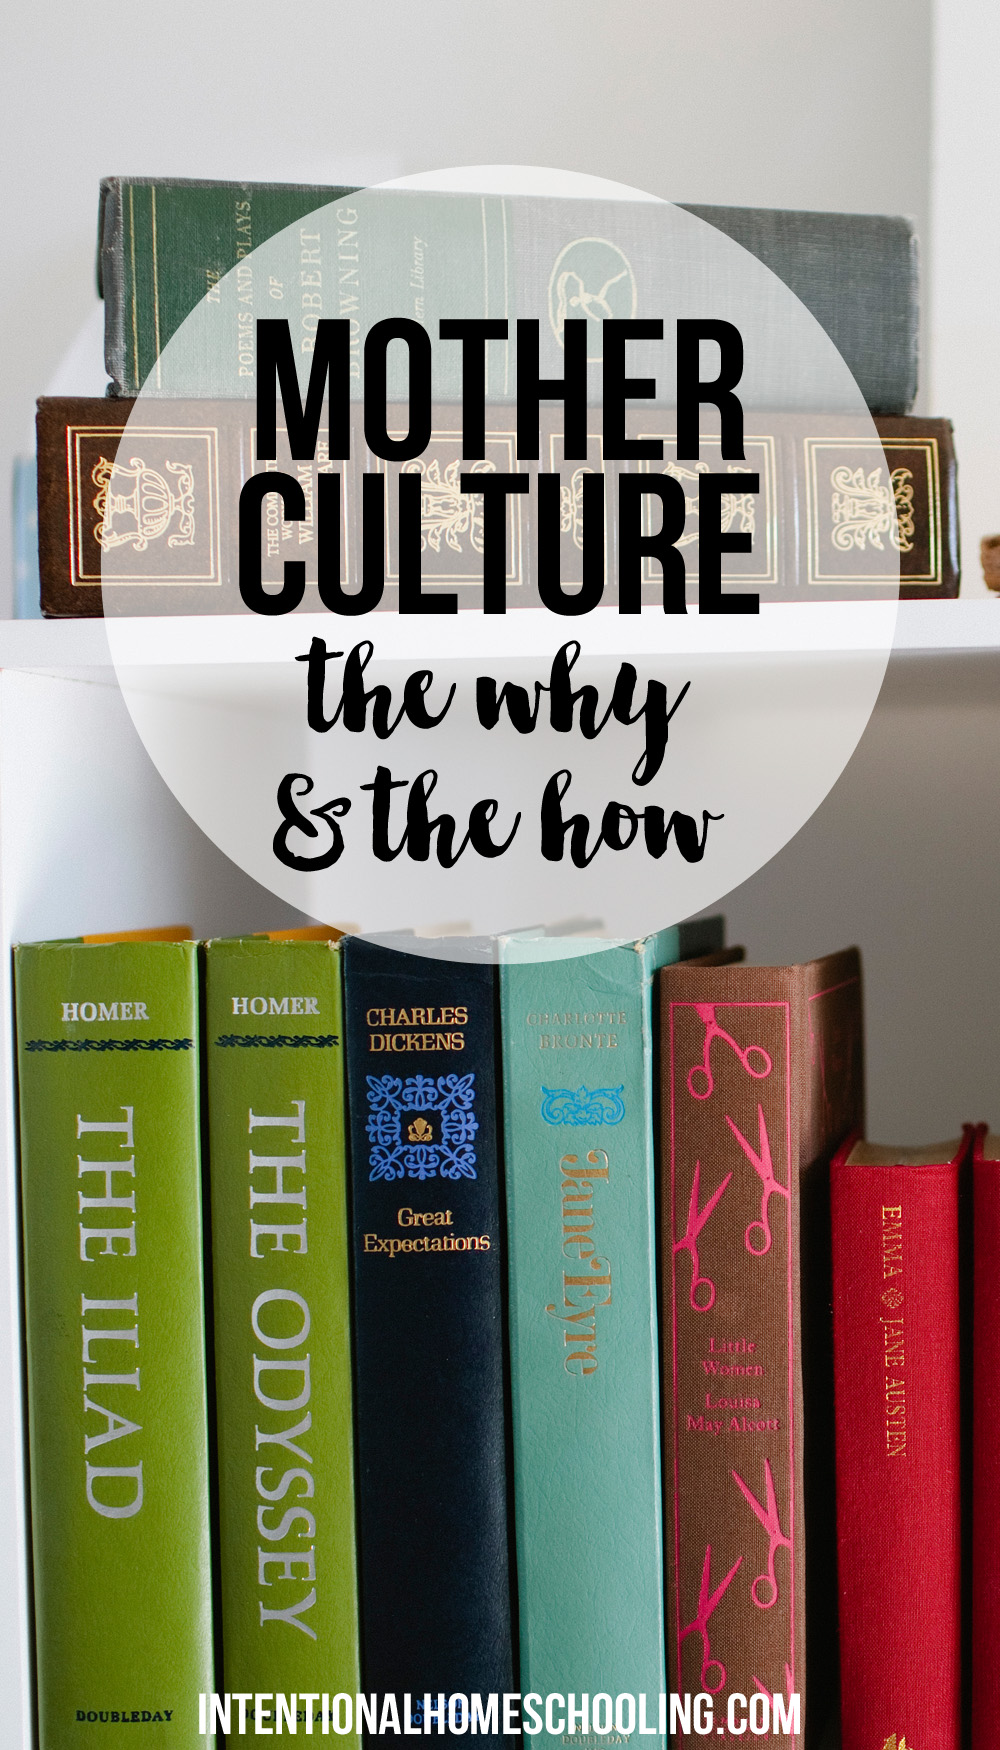 Mother Culture - the why and the how. A great read for every homeschooling (and non-homeschooling) mom!